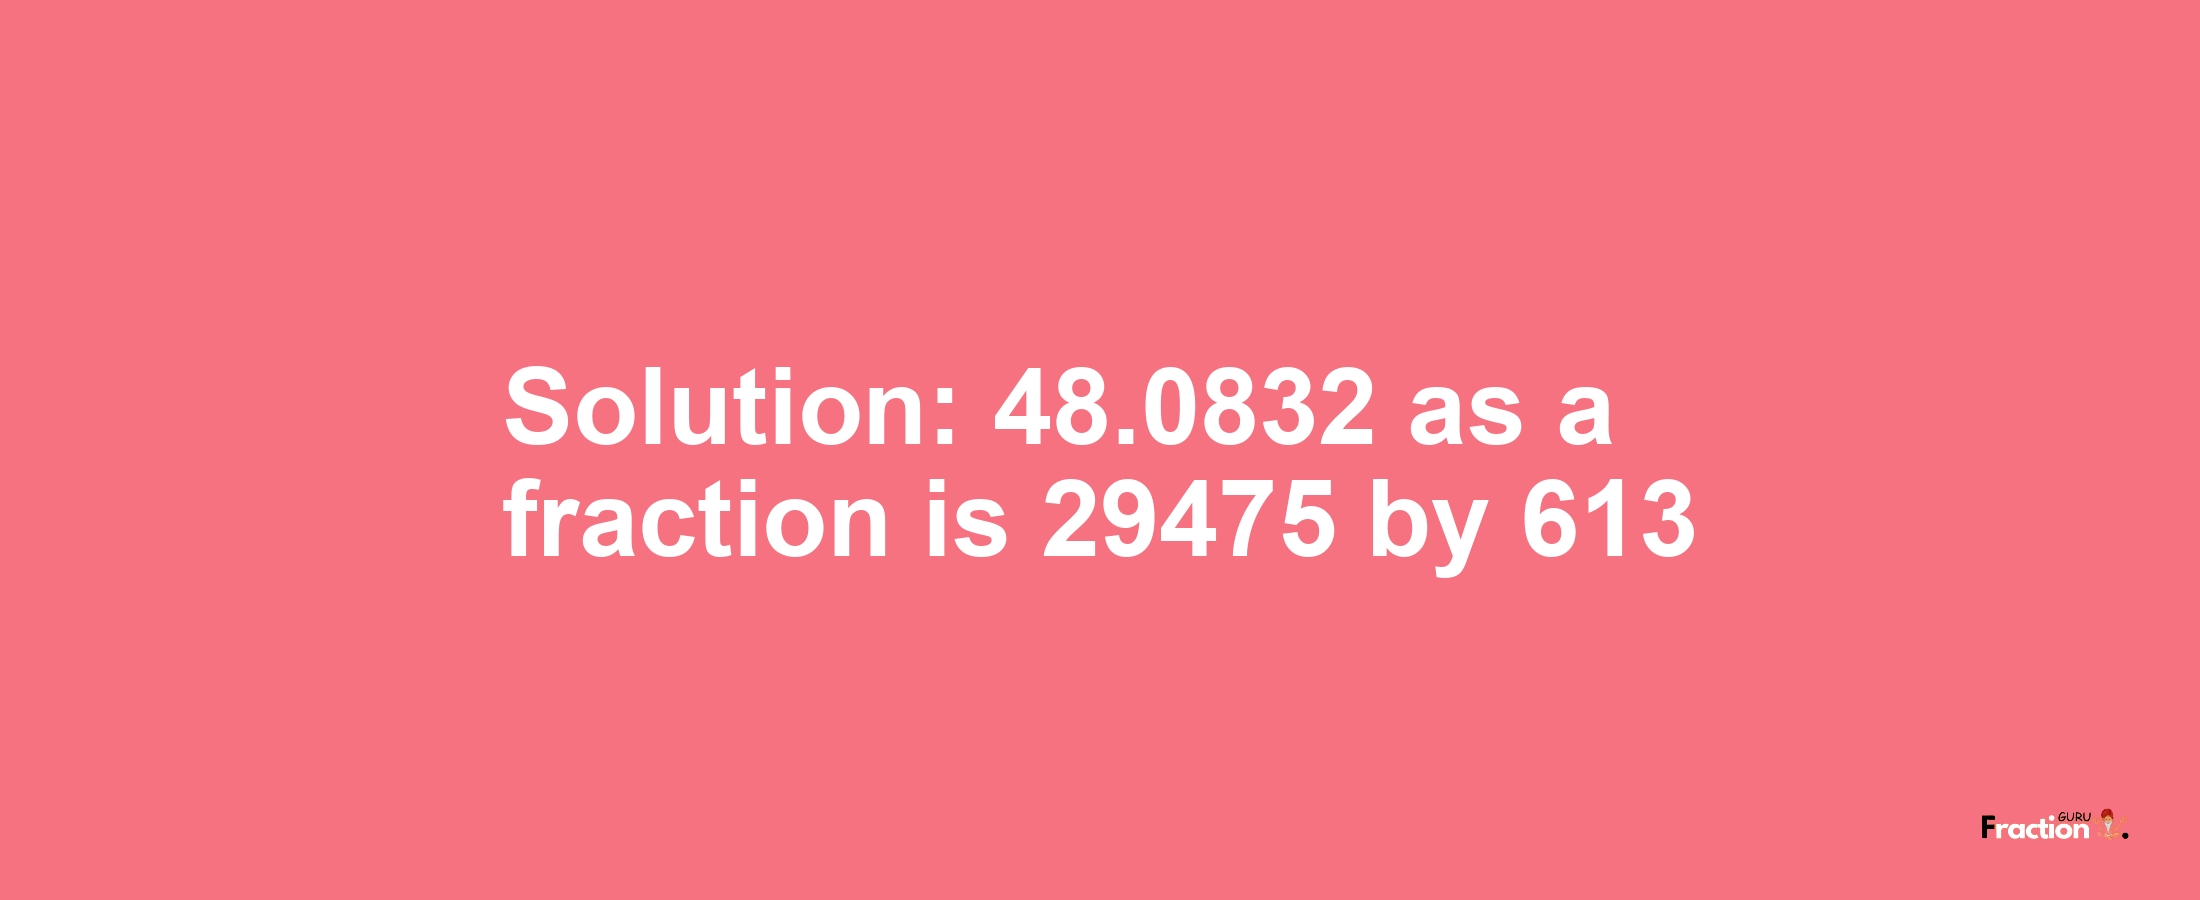 Solution:48.0832 as a fraction is 29475/613